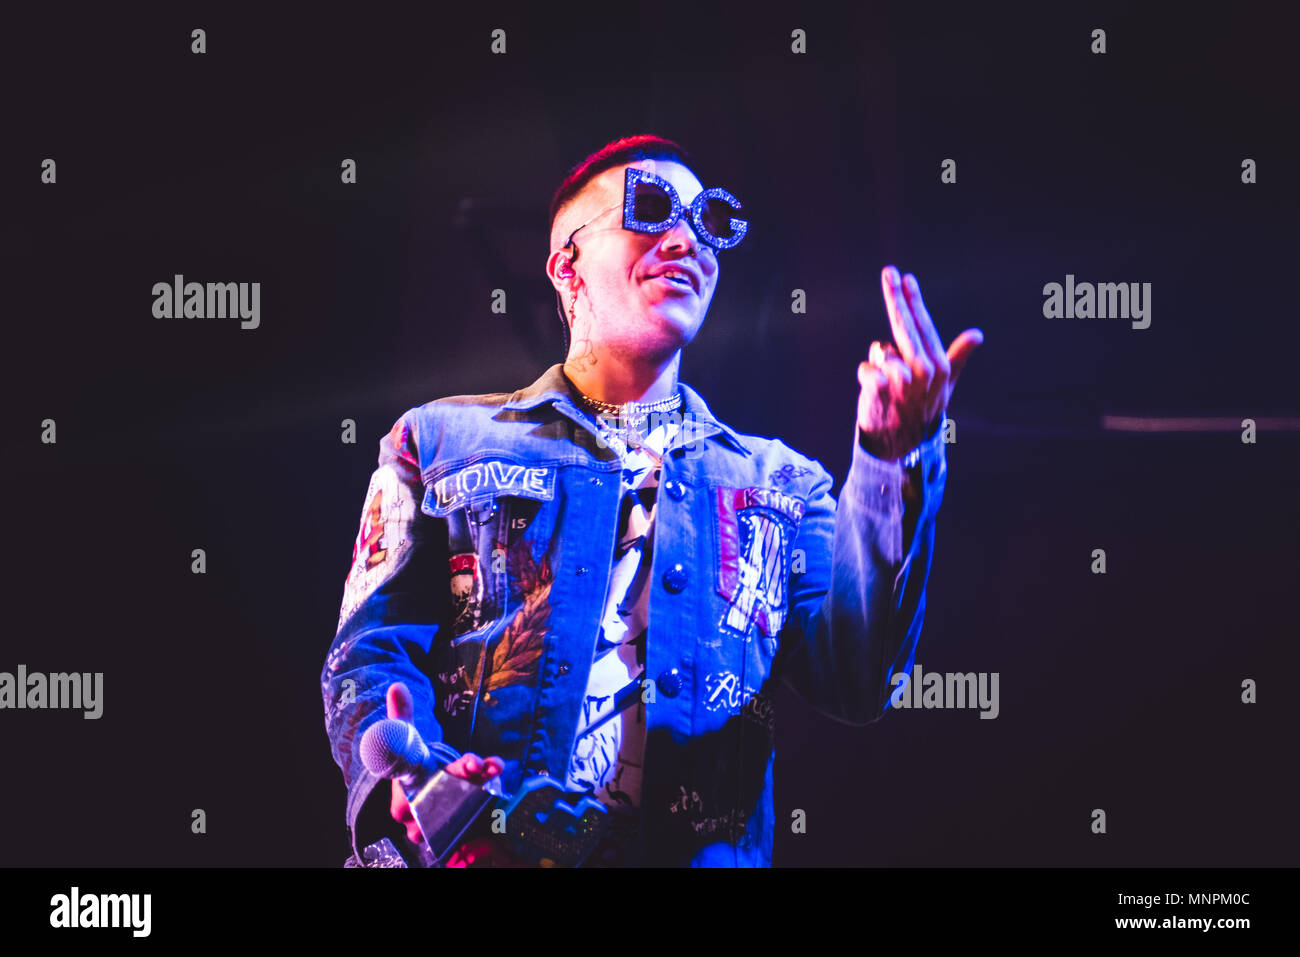 The Italian rapper Sfera Ebbasta, the "King of Trap" performing live on  stage at the sold out Teatro della Concordia in Venaria, near Turin, for  his first "Rockstar tour" concert. (Photo by